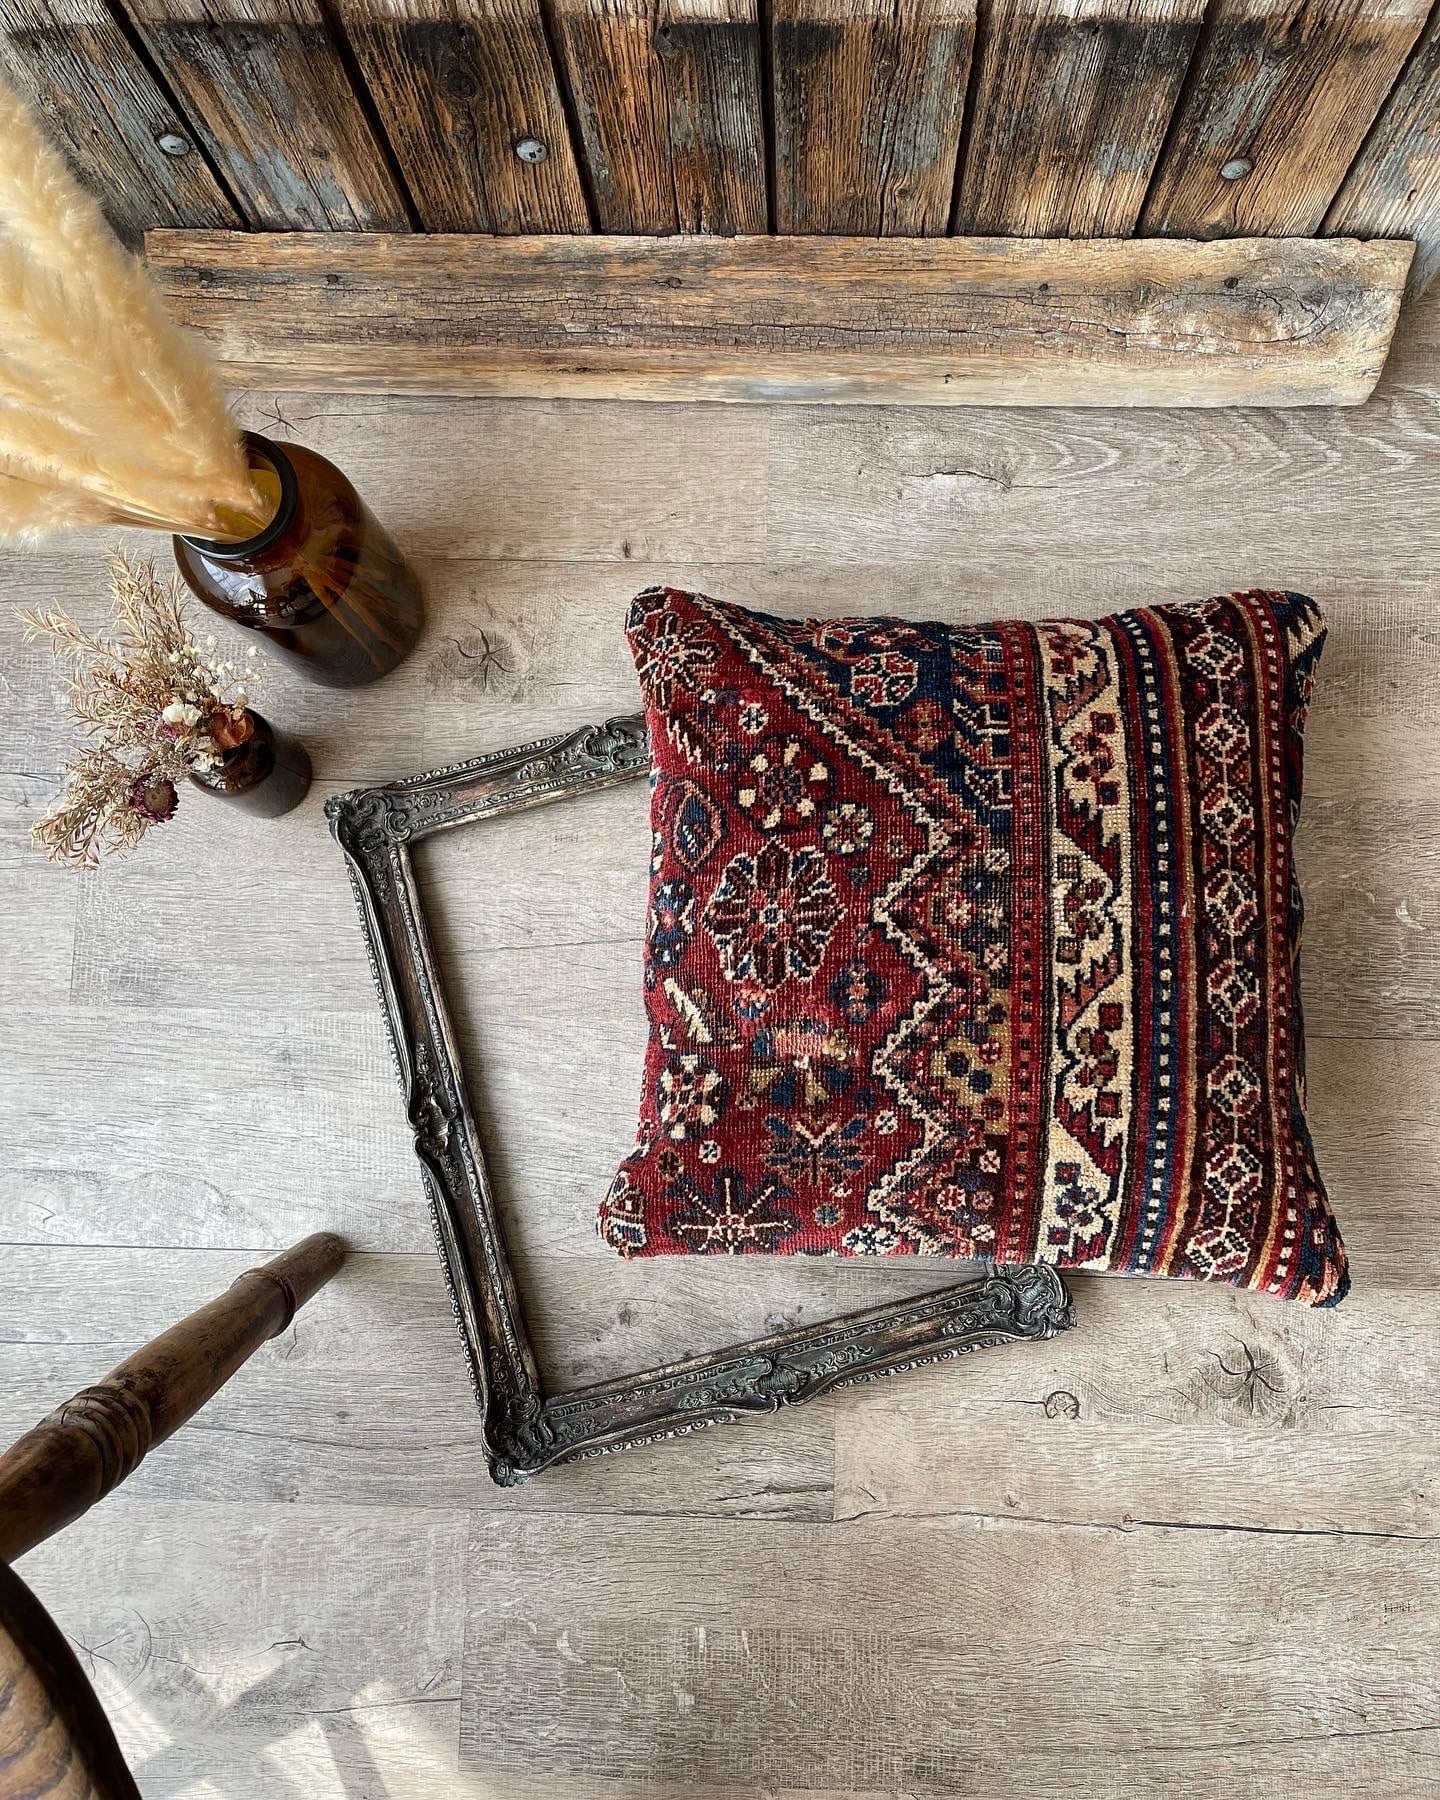 【070】Antique Shiraz Cushion Cover 1900's - 1920's | ヴィンテージラグ専門店 | TimeRug  powered by BASE